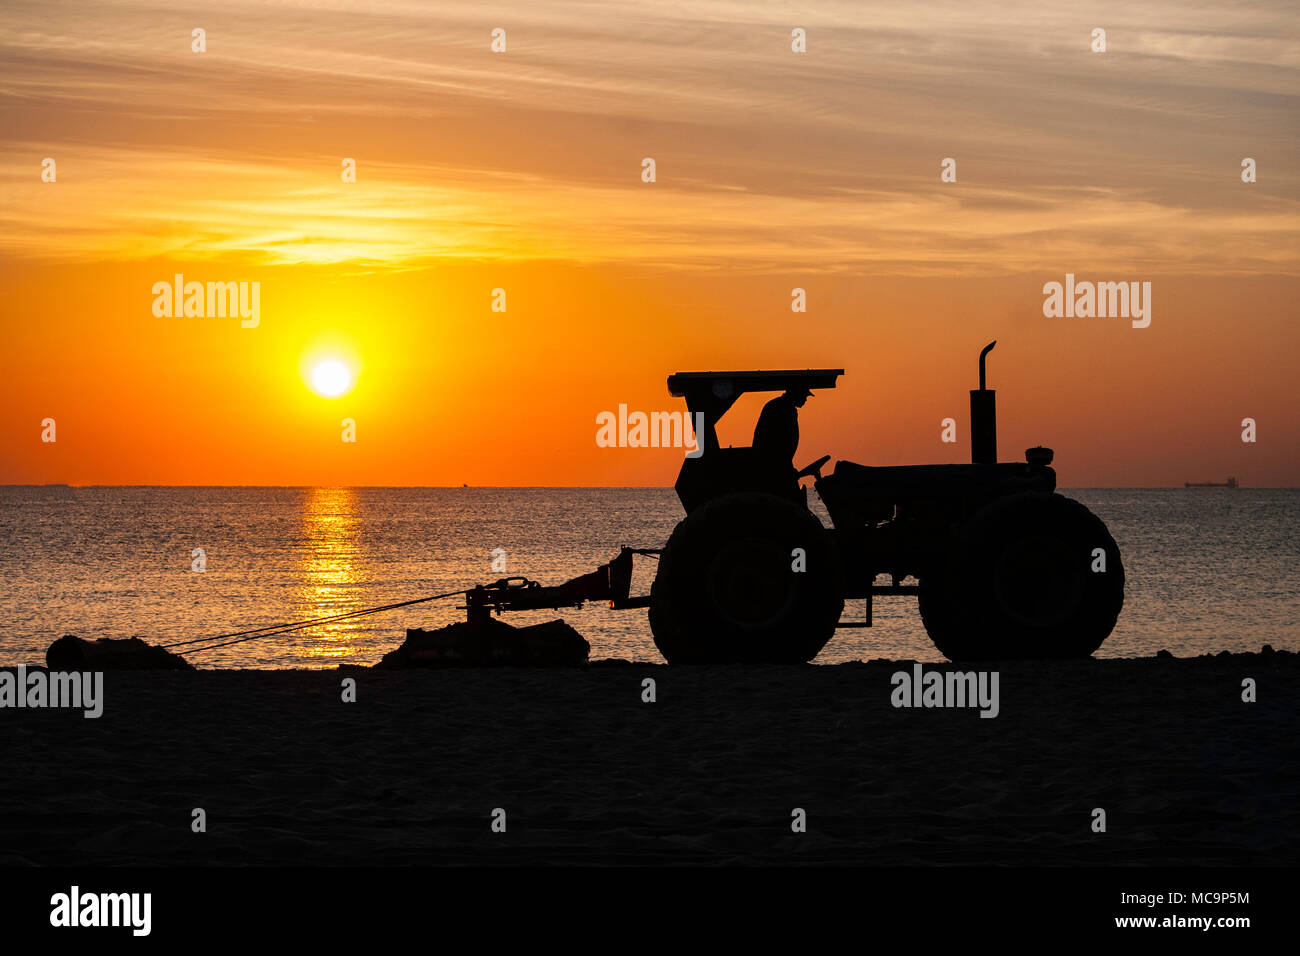 A tractor is silhouetted against the early morning sunrise as it clears the sandy beach of seaweed brought in by high tide in Hollywood, Florida. Stock Photo